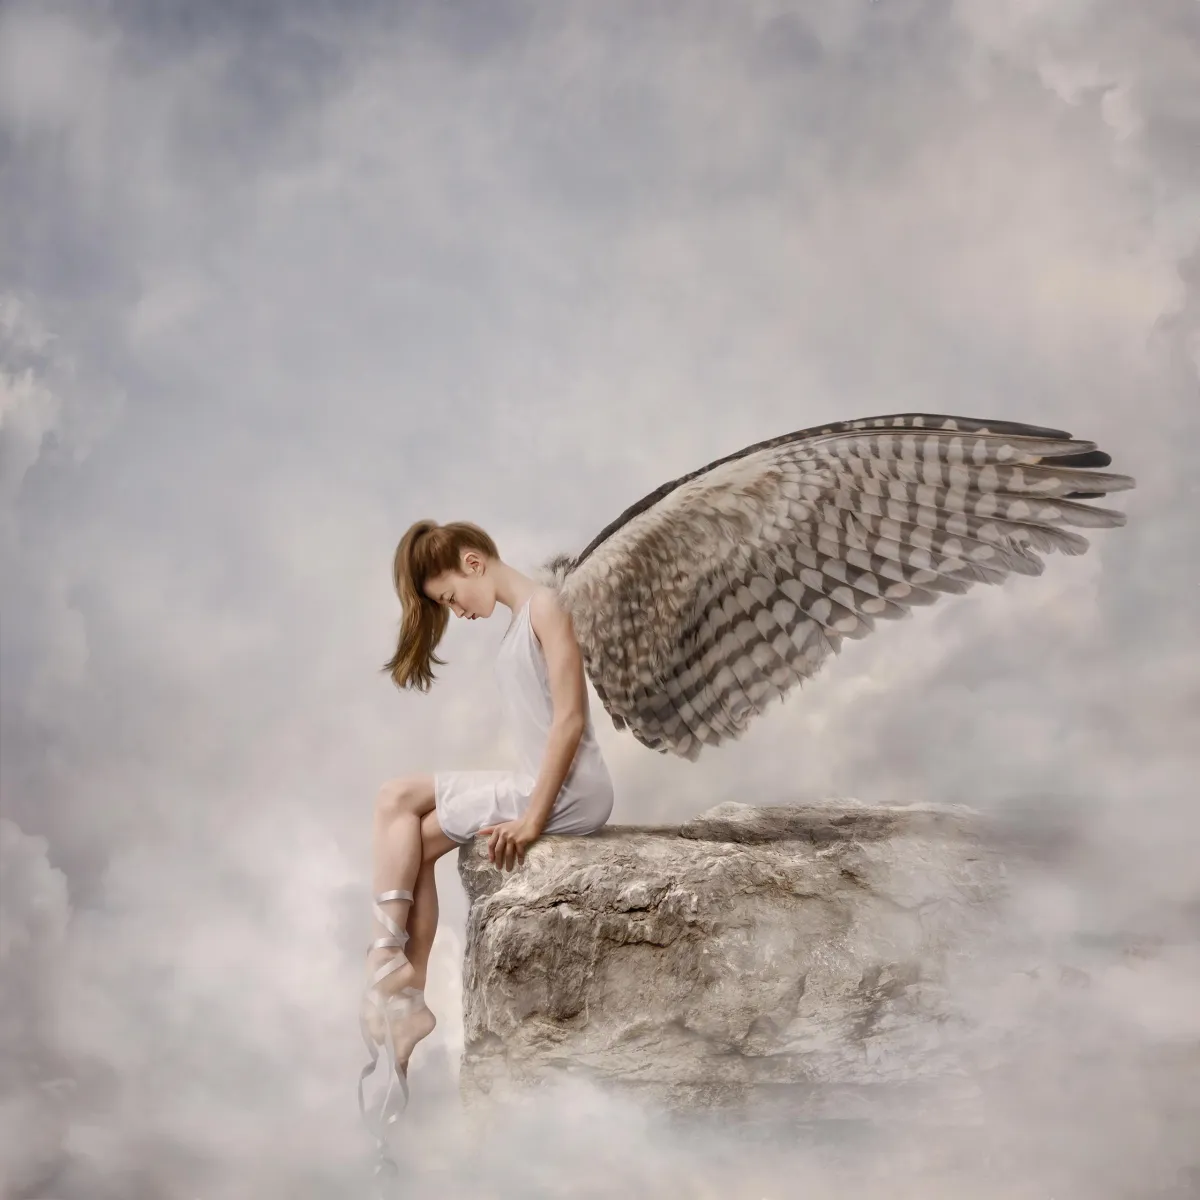 A photography composite image by Alana Lee of a girl dancer with wings sitting on the edge of a cliff in the clouds